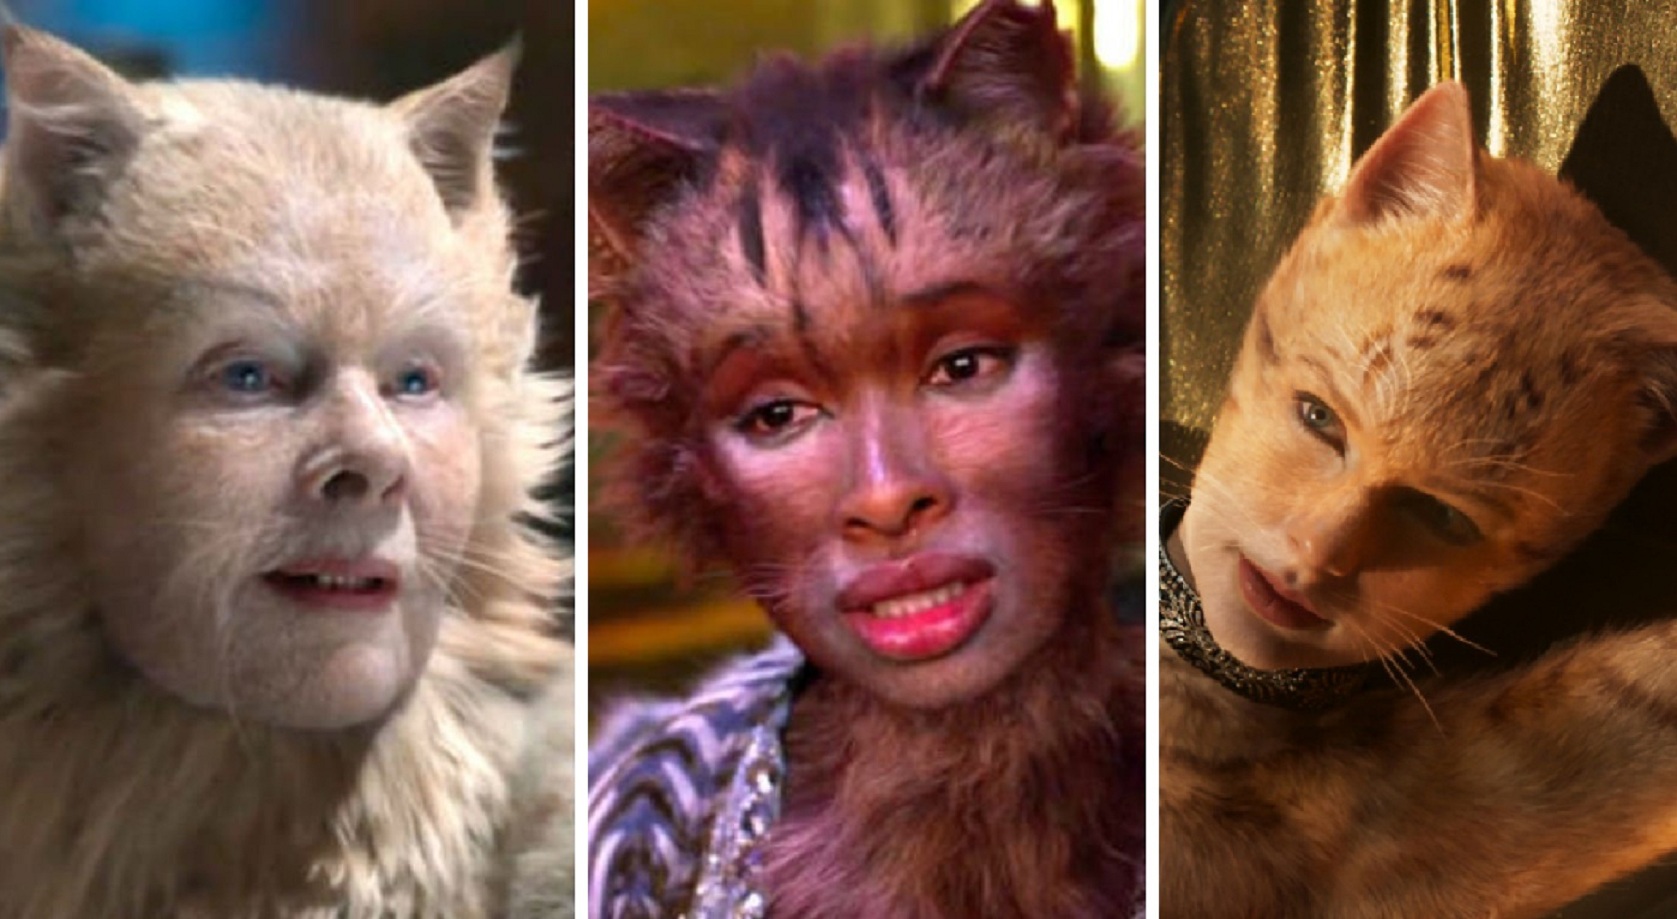 What’s With All The Hate For ‘Cats’ Trailer? It Actually Looks Pretty Fabulous!